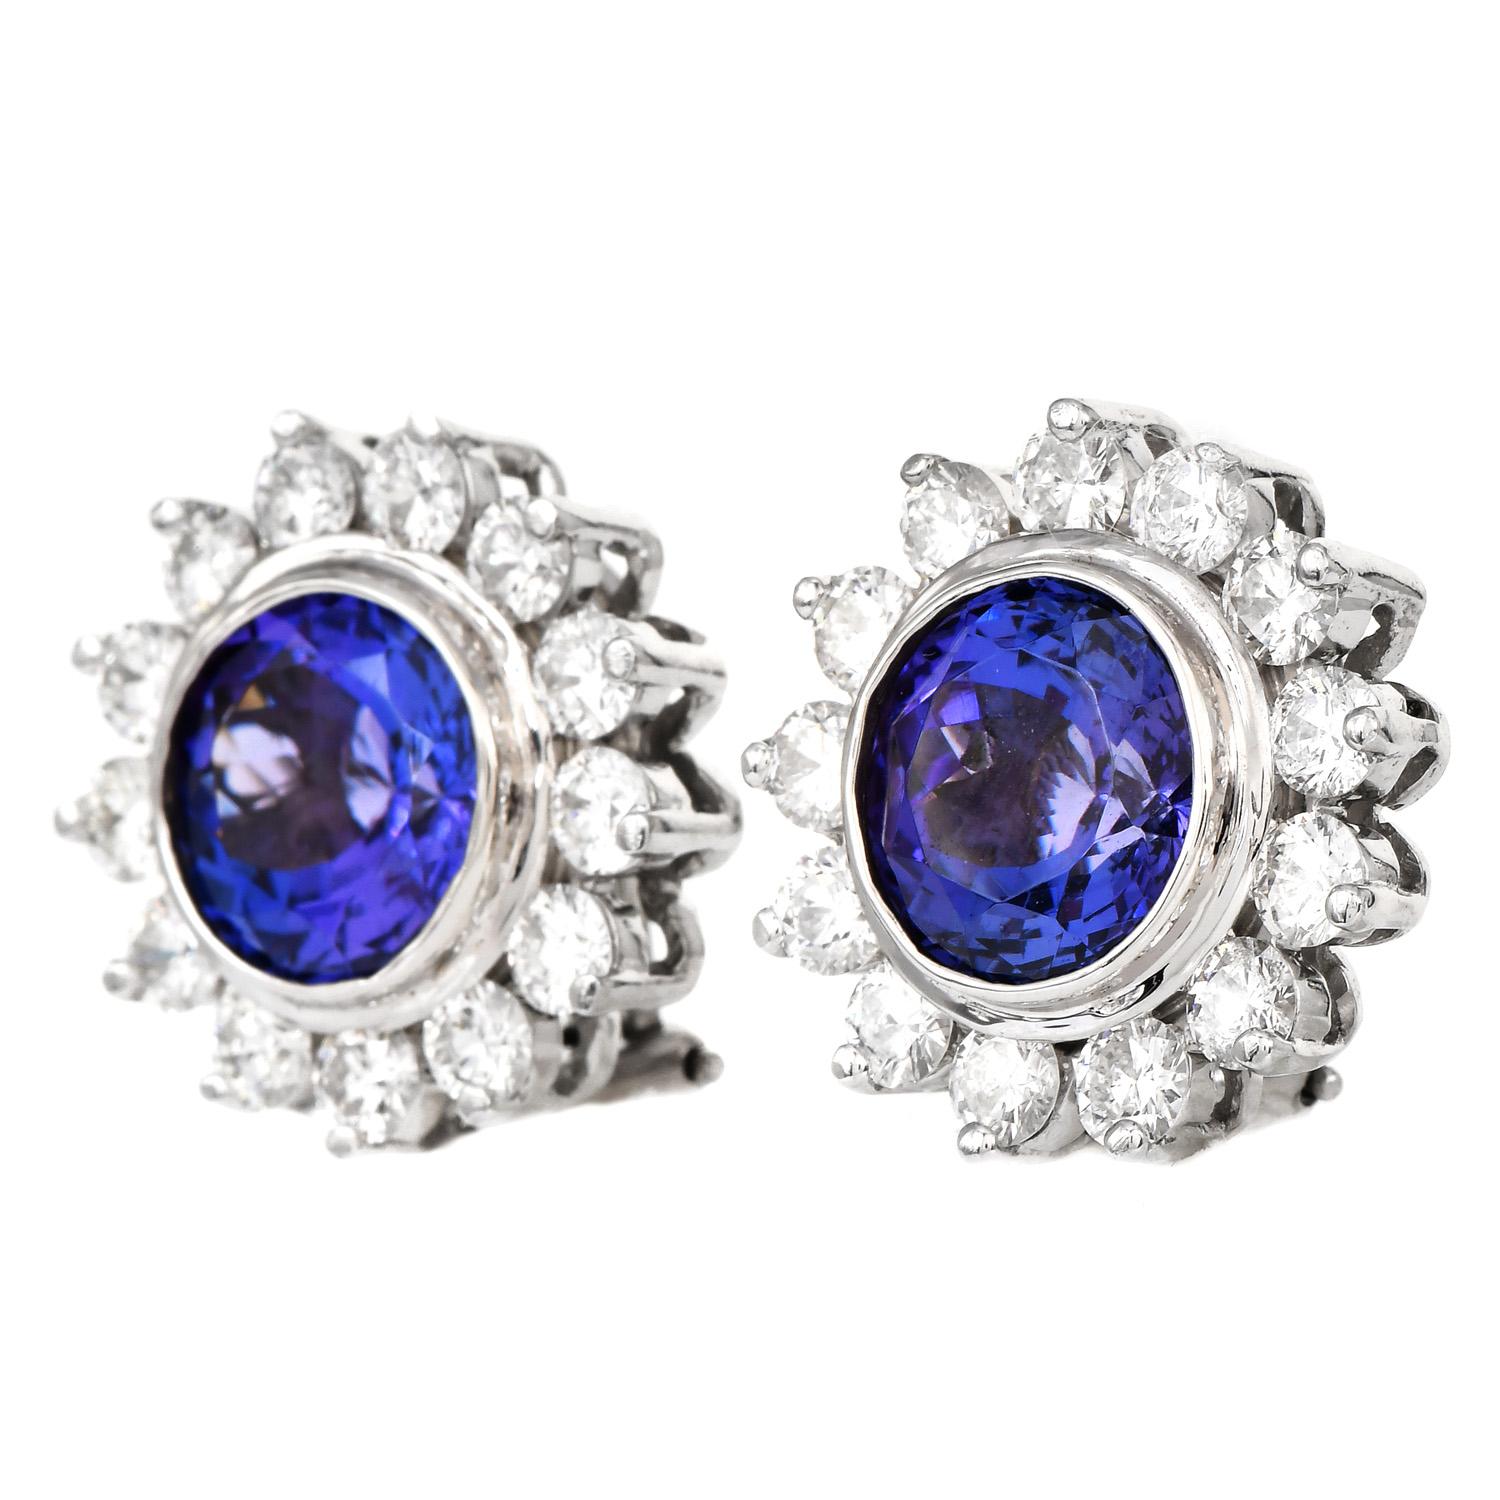 A magnificent display of a Deep, Vivid Purple Blue Color!

They are crafted in solid platinum with a High polished finish, a floral motif, and a halo design of diamonds surrounding the pieces.

 Composed of (26) round-cut, pave-set, Diamonds